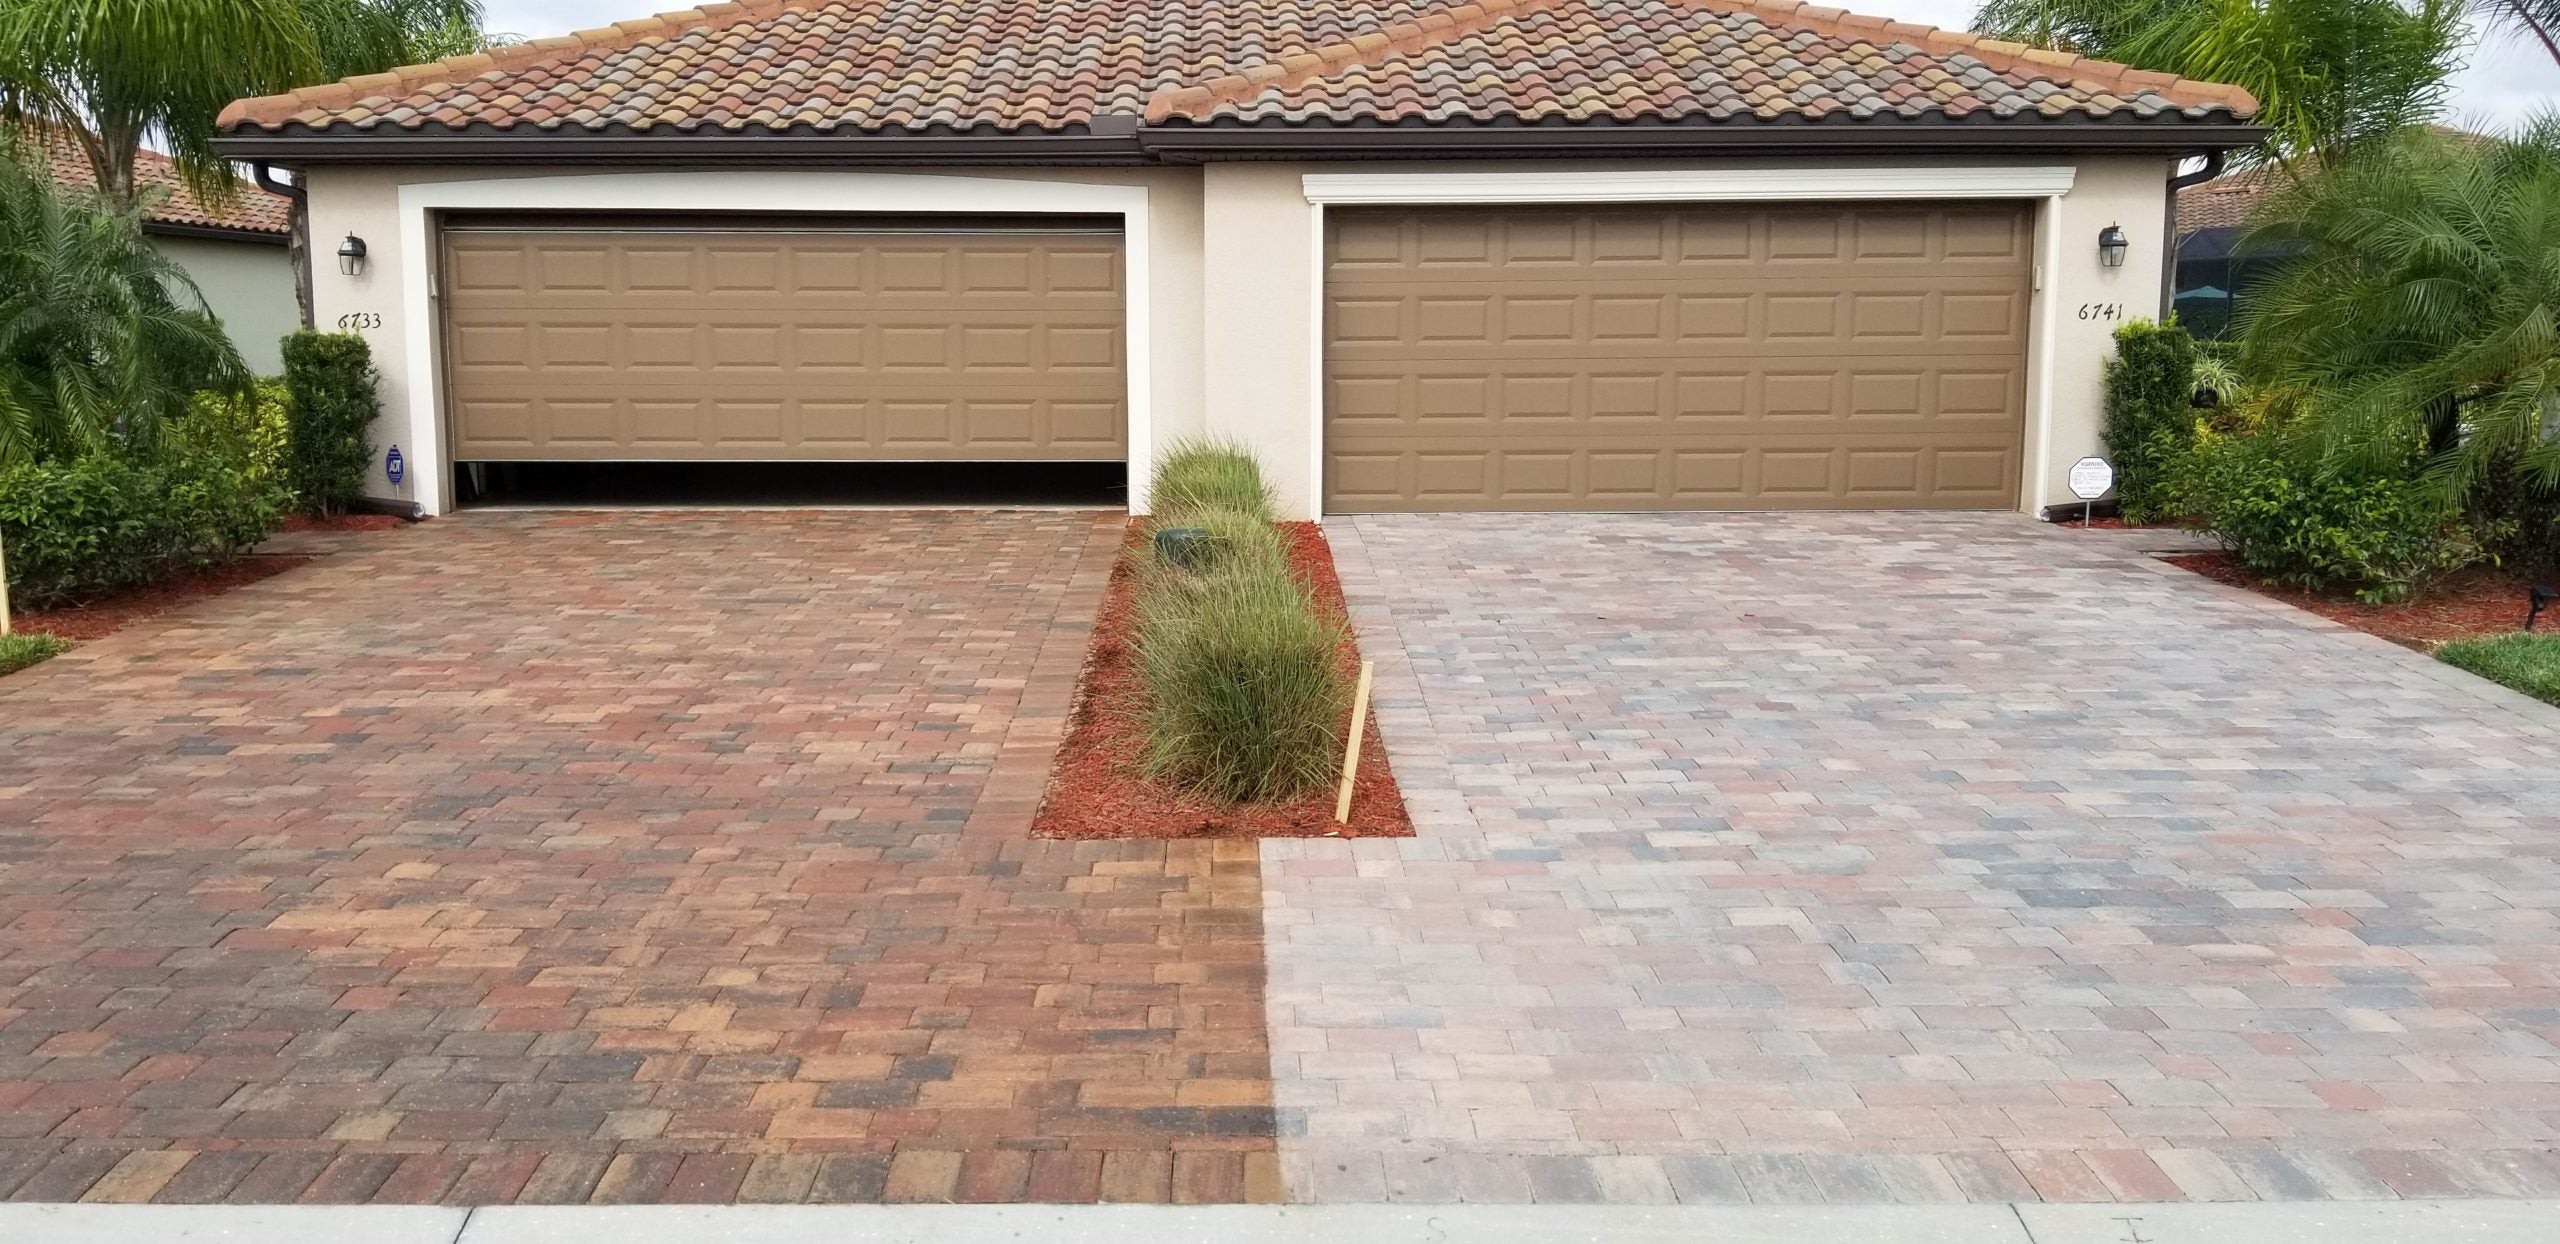 House with a paver driveway